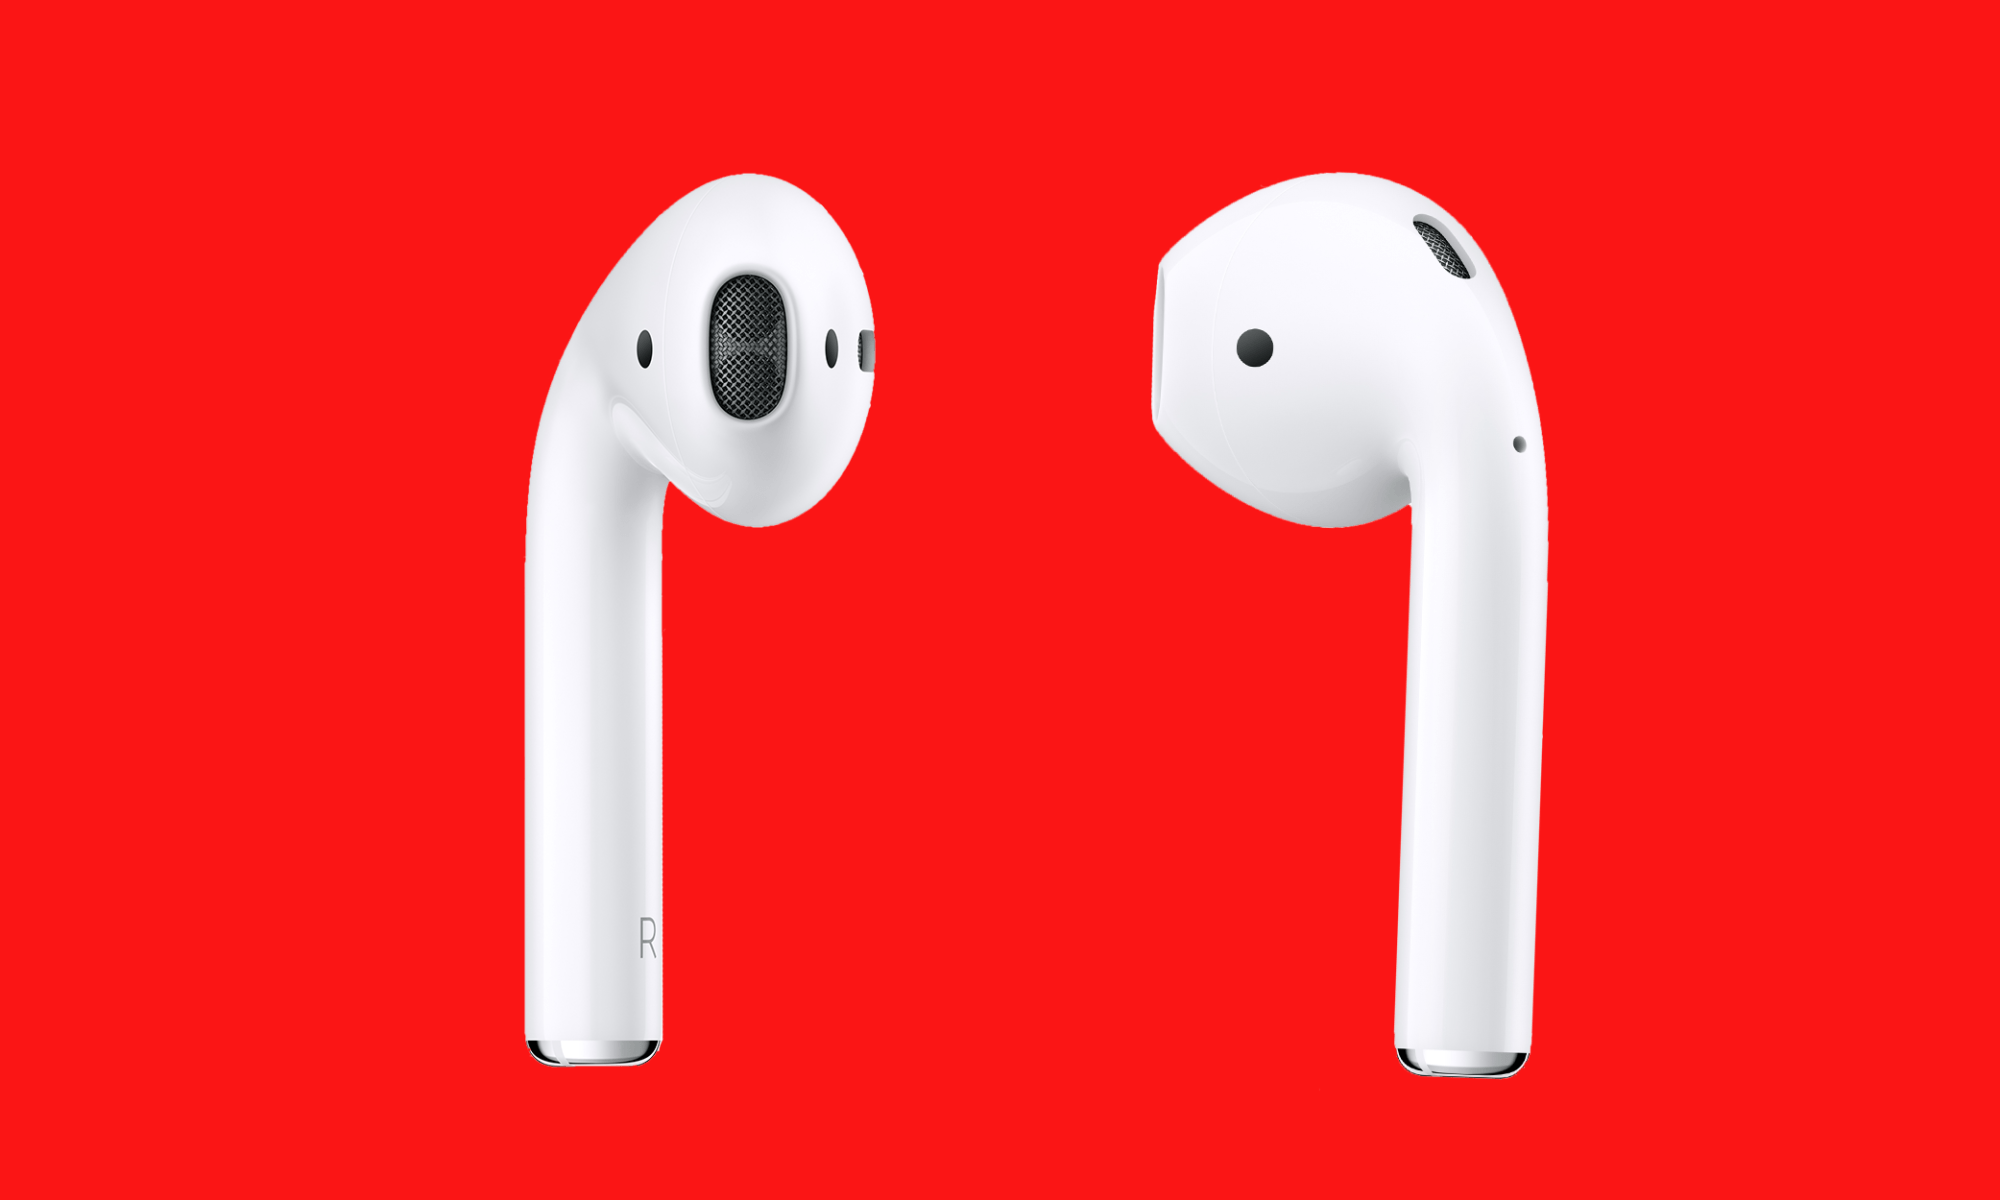 What are 10 ways to fix one AirPod that dies faster?